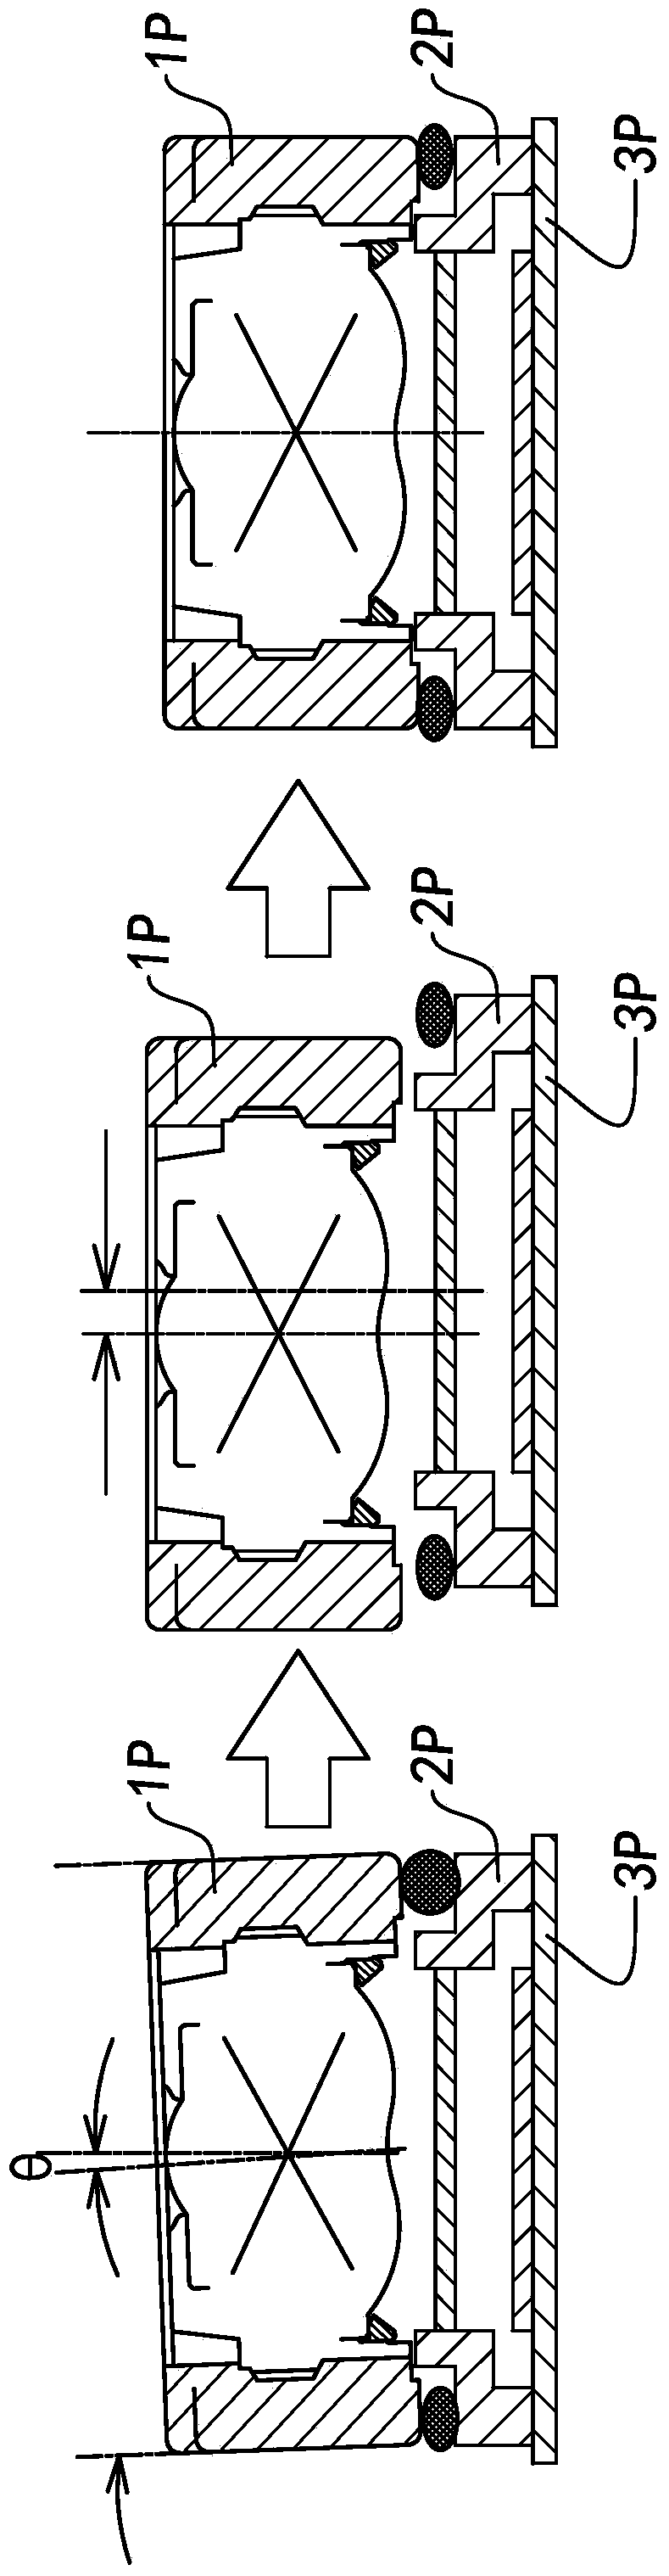 Camera module and its structure and assembly method